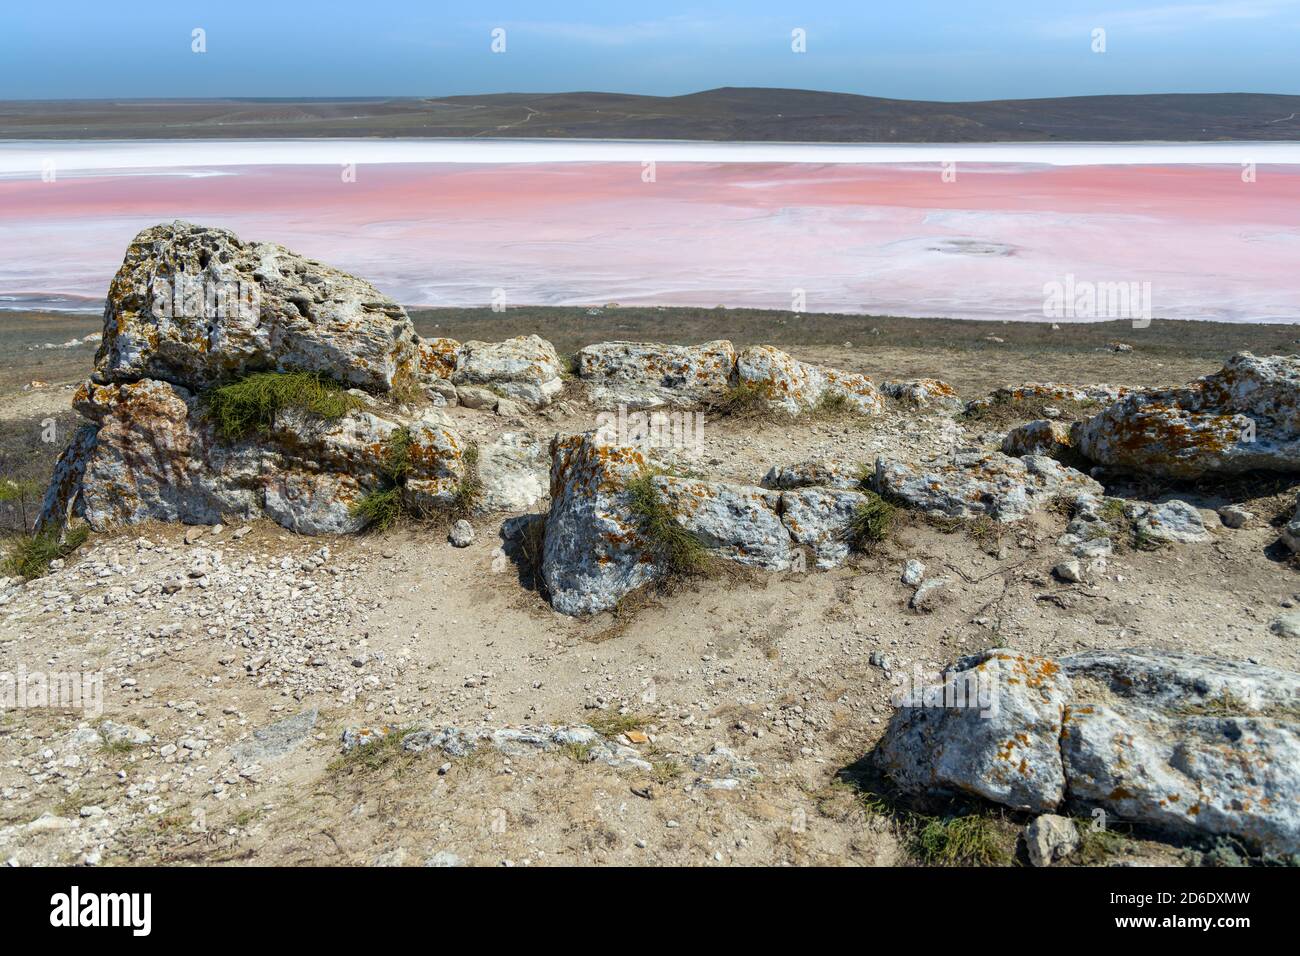 Pink salt lake Sasyk-Sivash, Yevpatoria, Crimea. The water of this lake is strongly saturated with salt and has a pink color. Very beautiful landscape Stock Photo